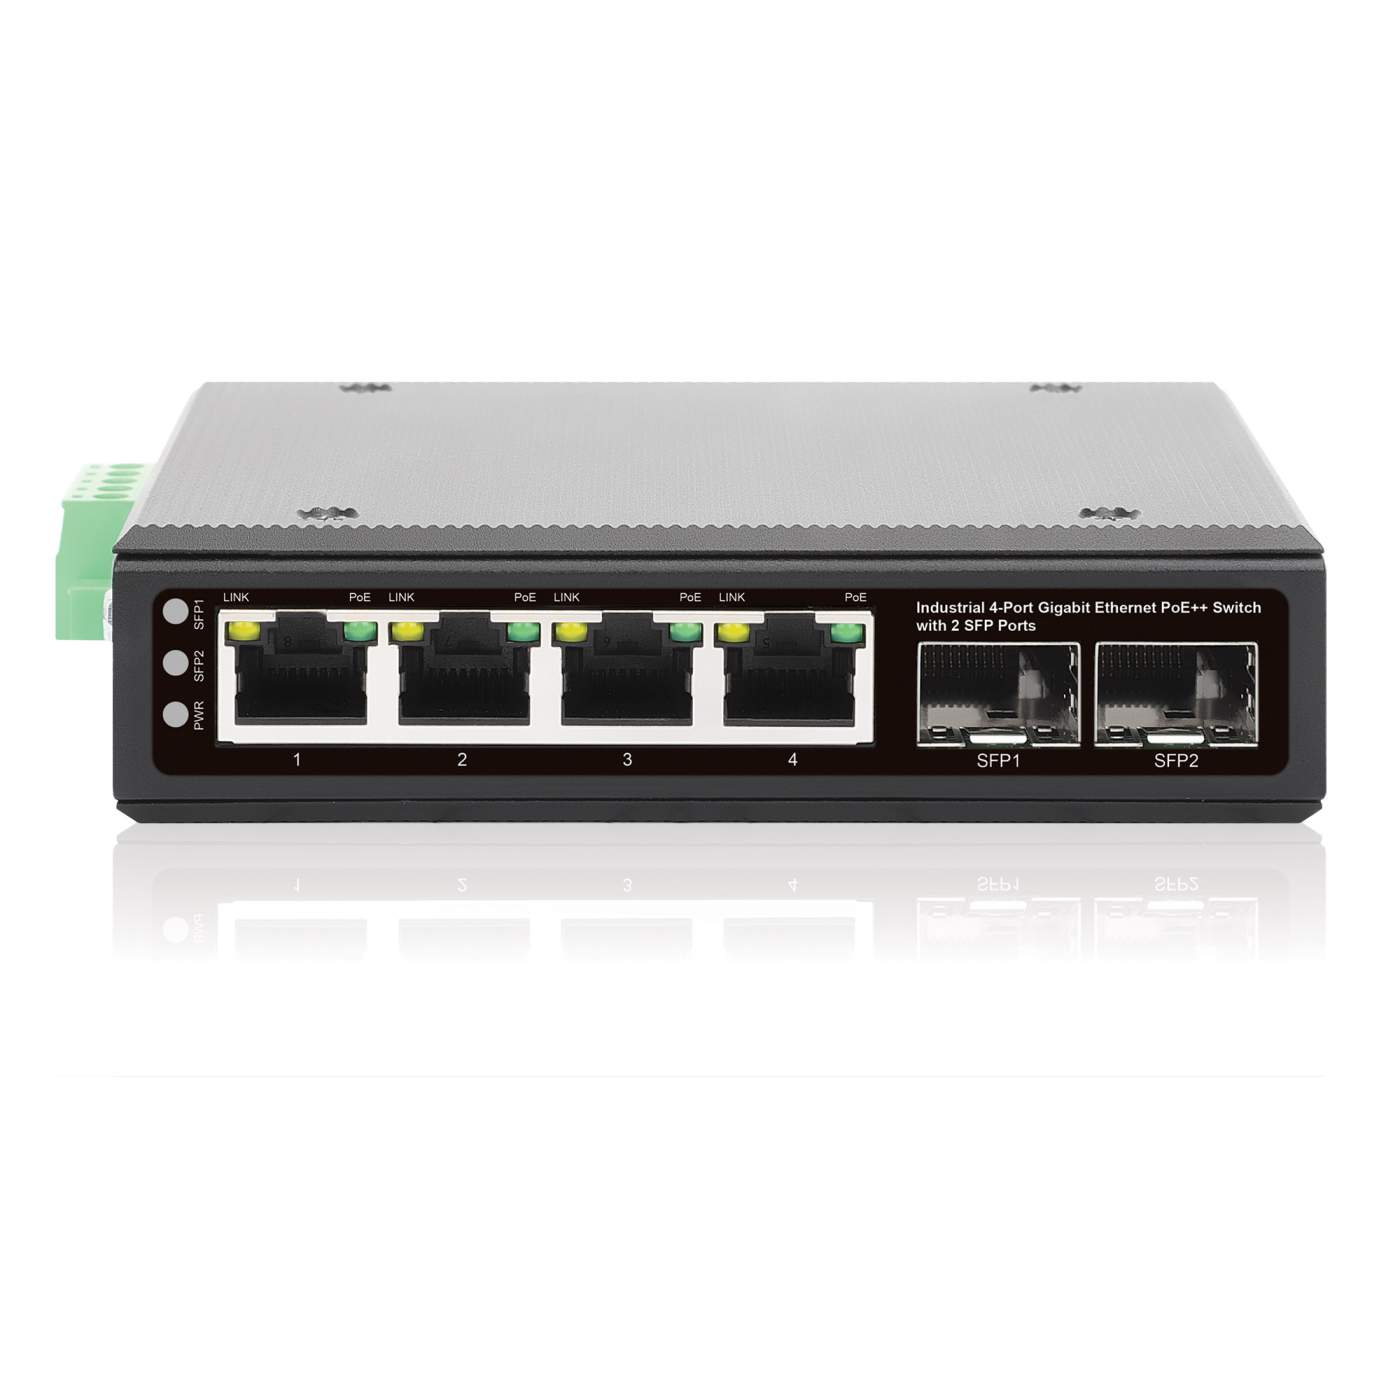 Intellinet Industrial 4-Port Gigabit Ethernet PoE++ Switch with 2 SFP Ports, IEEE 802.3bt (4PPoE) Compliant, PoE Power Budget Up to 240 W, Output. 508995